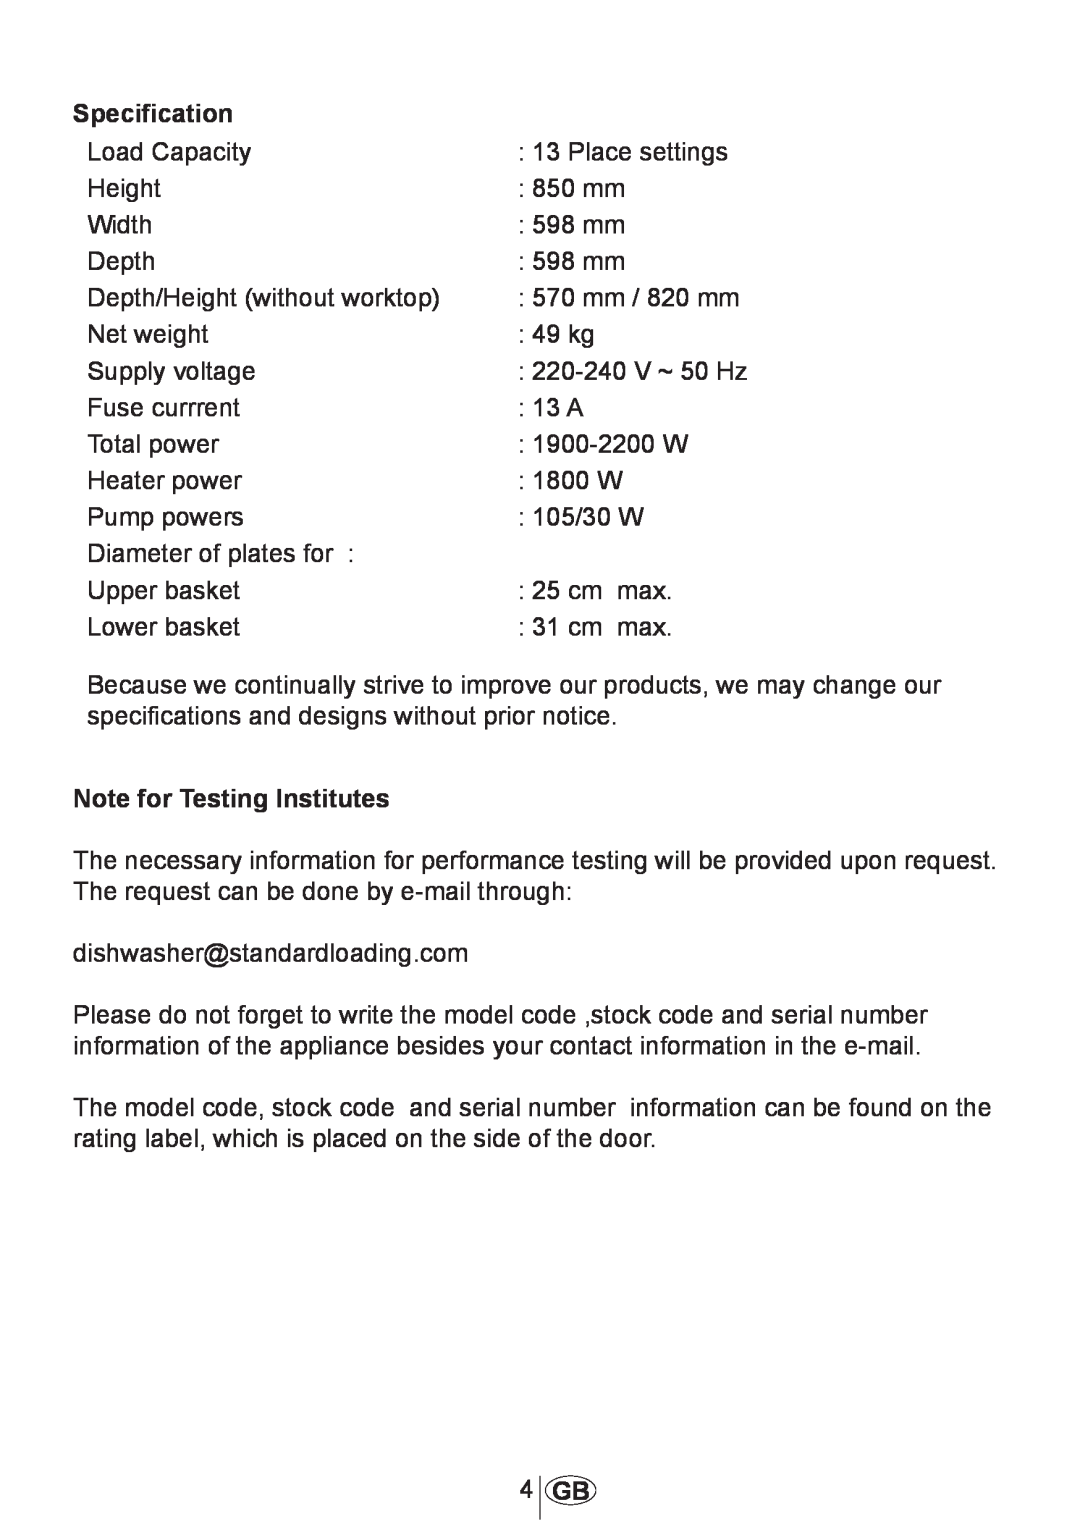 Beko DSFN 6839 W manual Specification, Note for Testing Institutes 